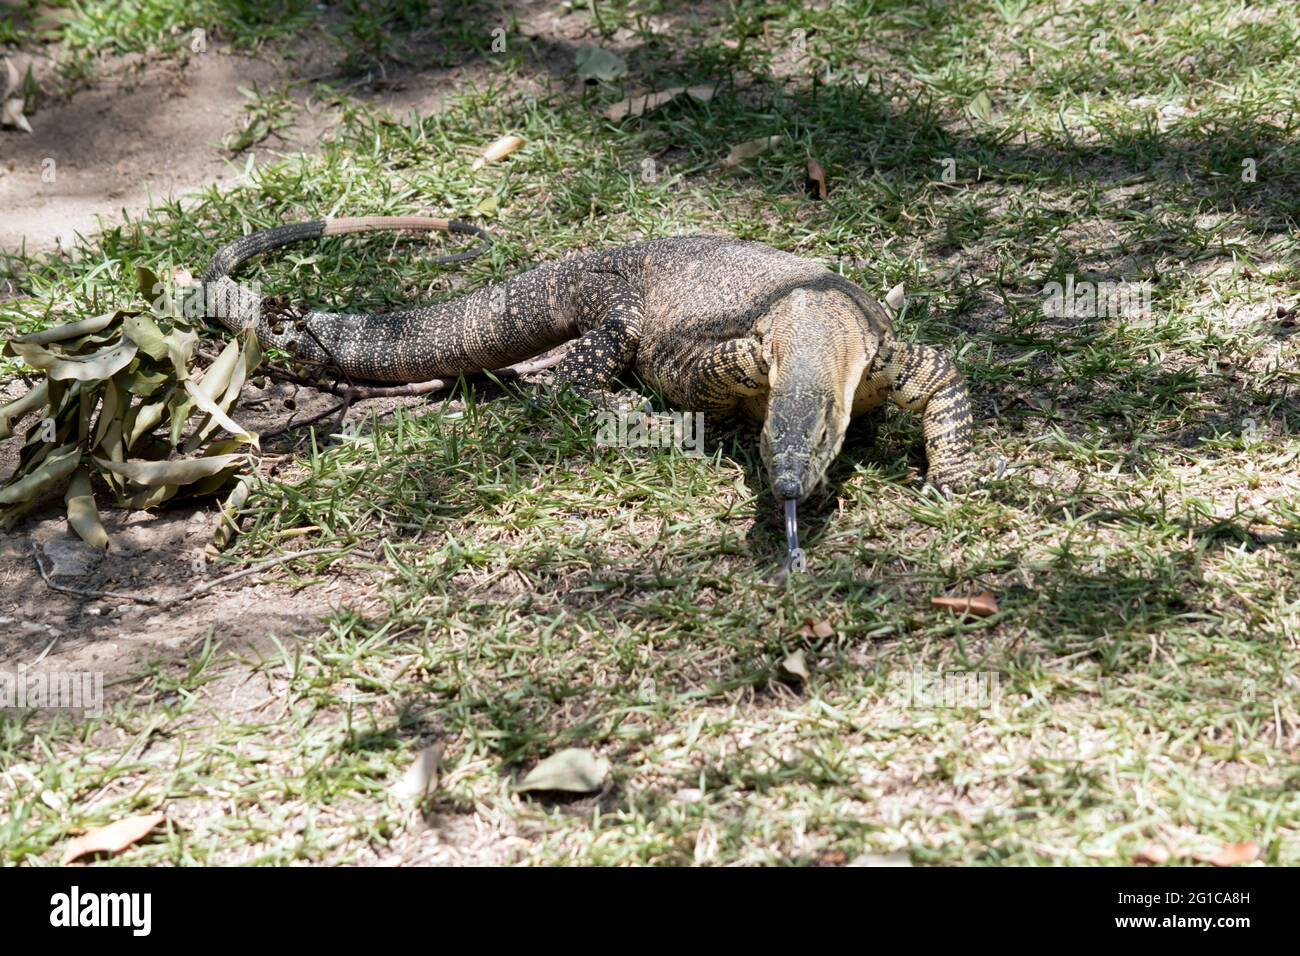 the lace monitor lizard is sticking out his tongue to get scent of any animals Stock Photo